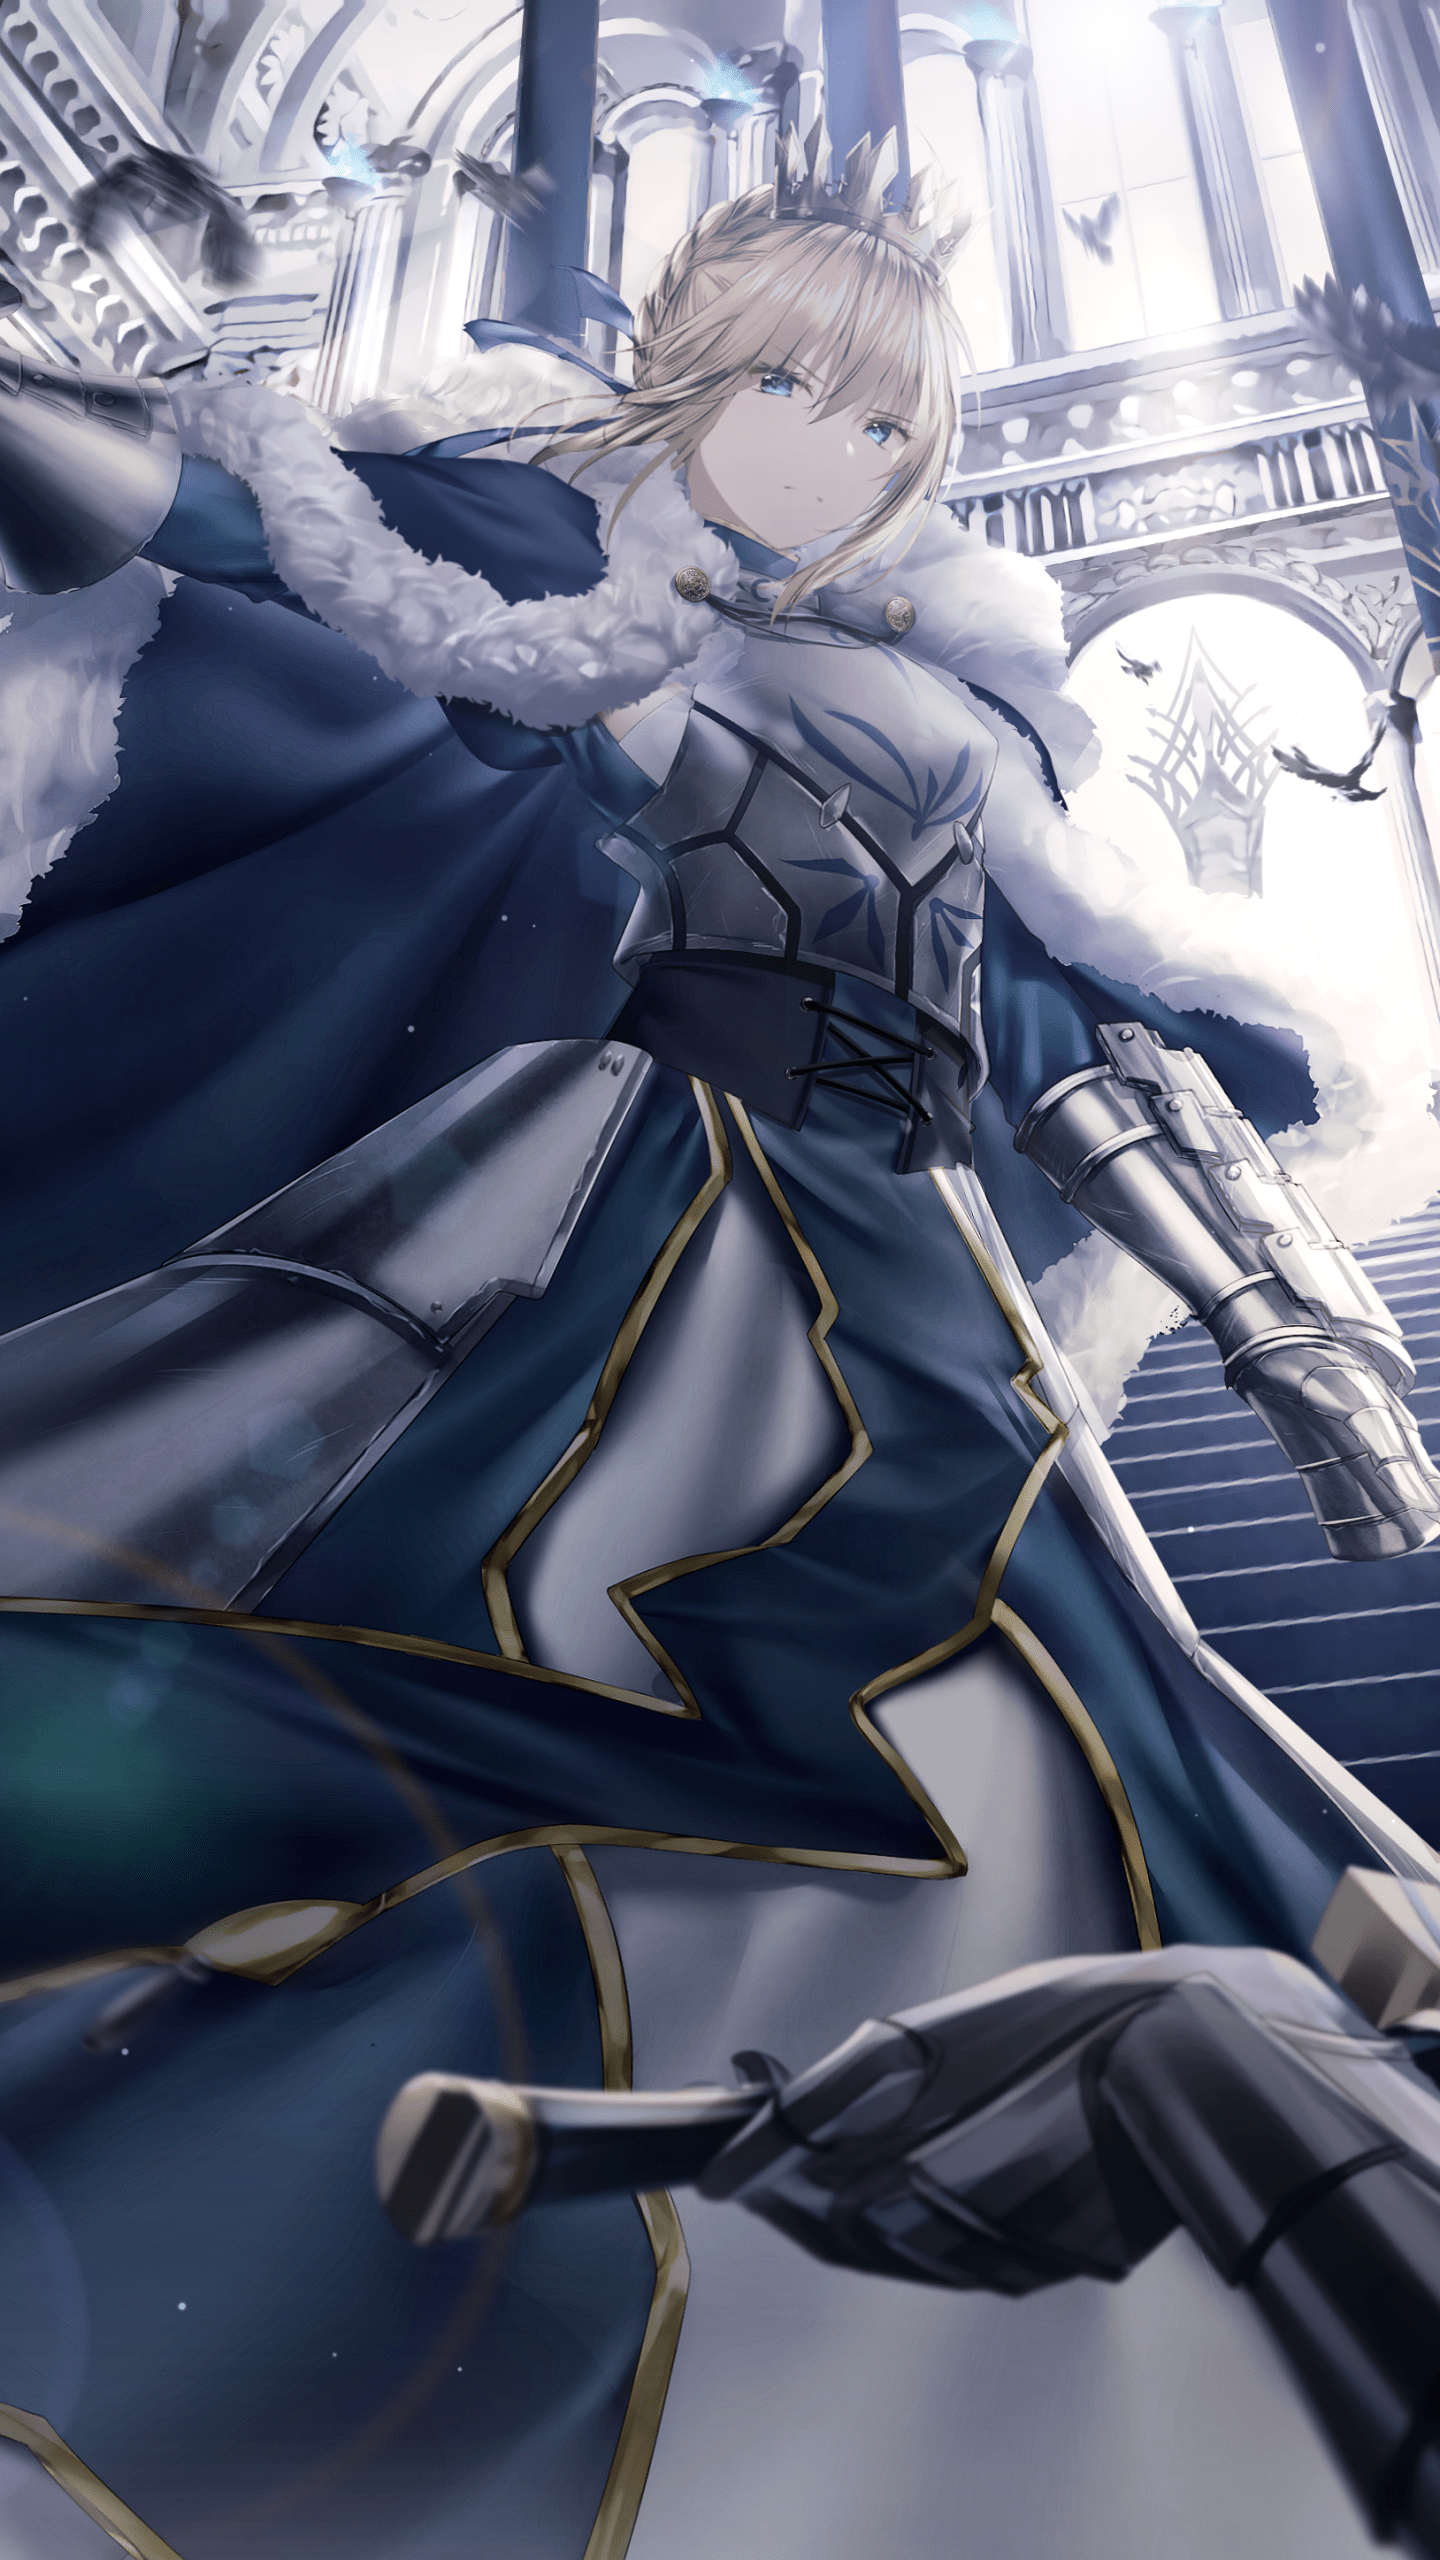 Fate Grand Order Phone Wallpapers - Top Free Fate Grand Order Phone ...